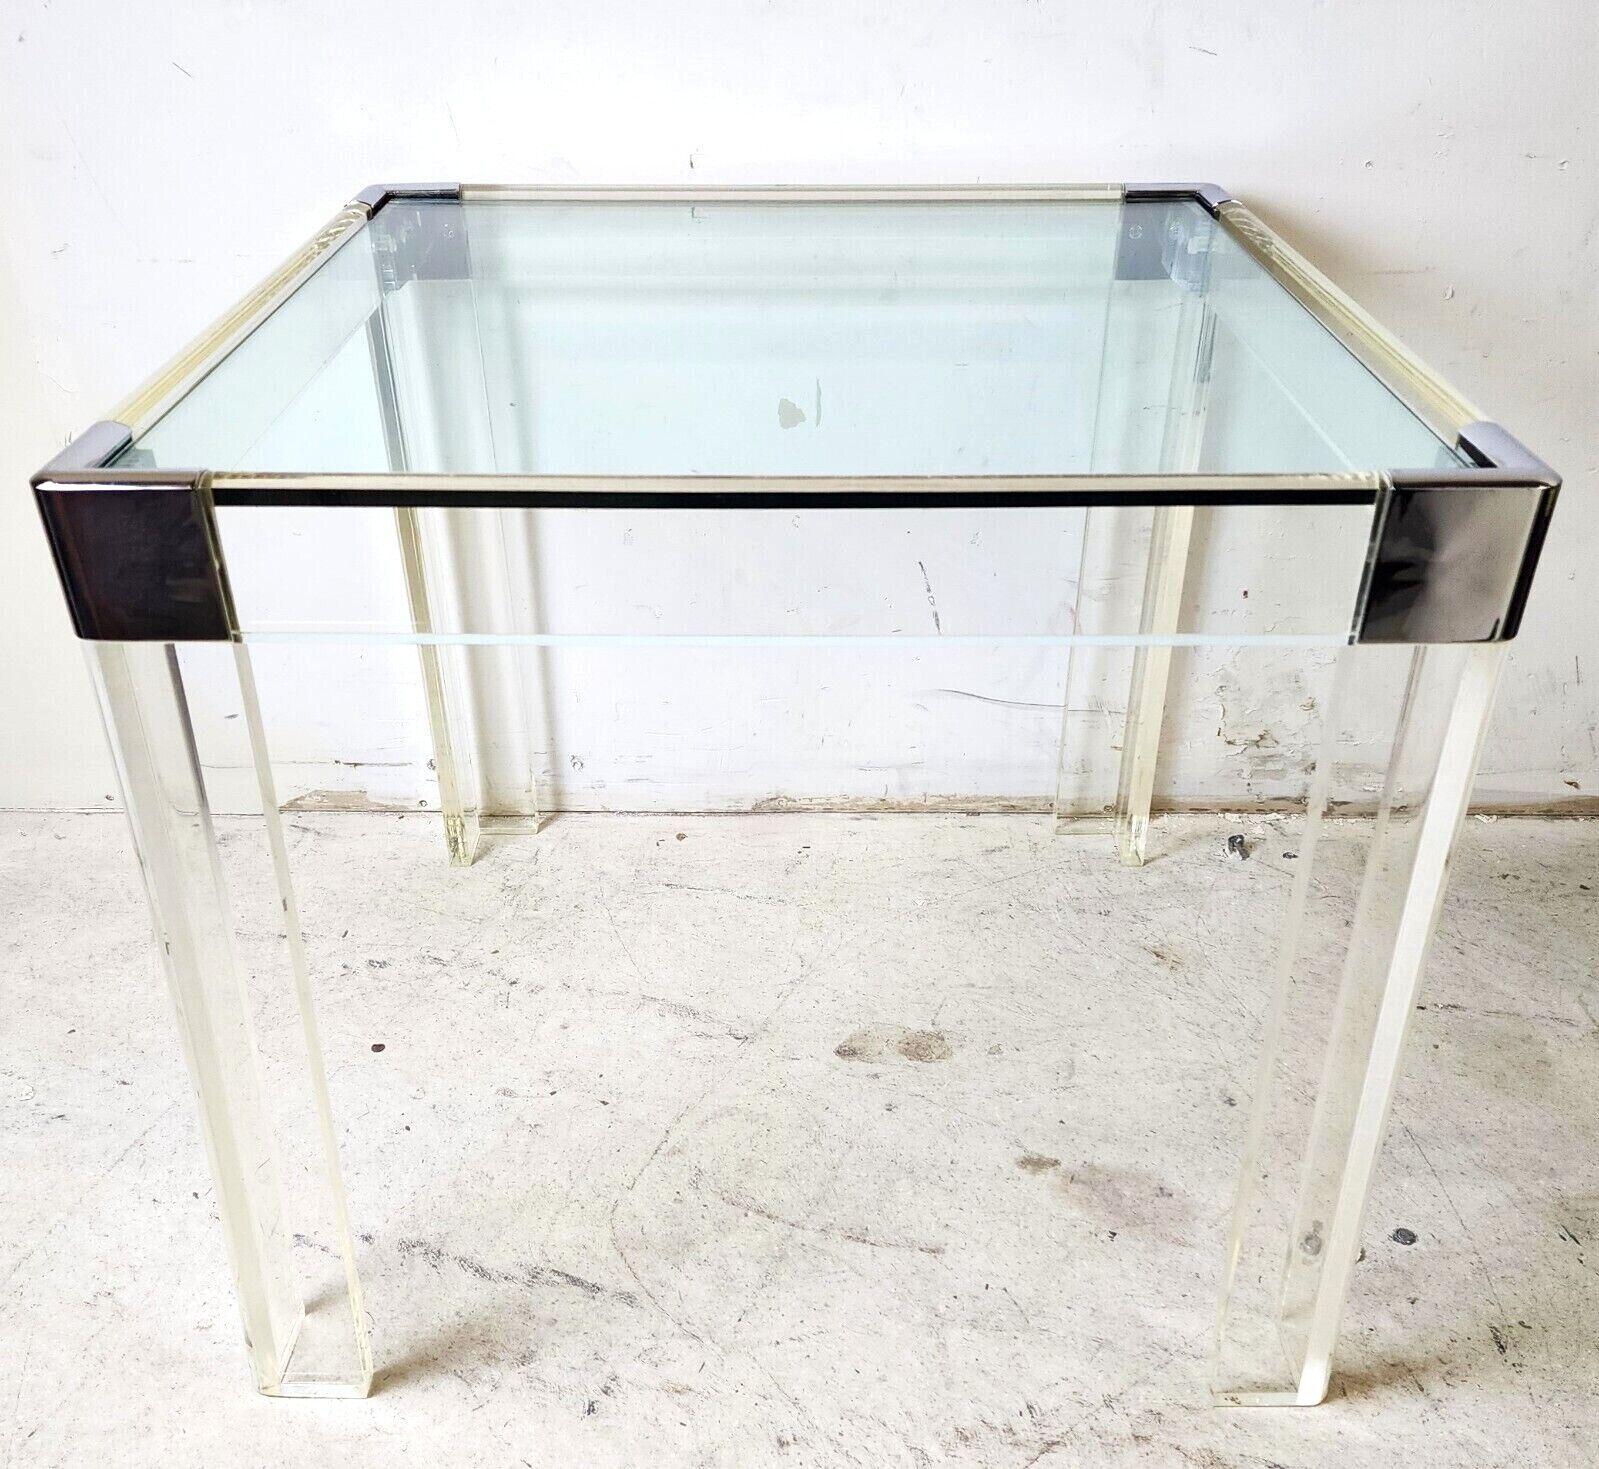 Offering one of our recent palm beach estate fine furniture acquisitions of a
vintage 1960s lucite & solid chrome Charles Hollis Jones style dining game table.

We have many other similar tables listed including a Vintage MCM LUCITE ACRYLIC 3 PRONG